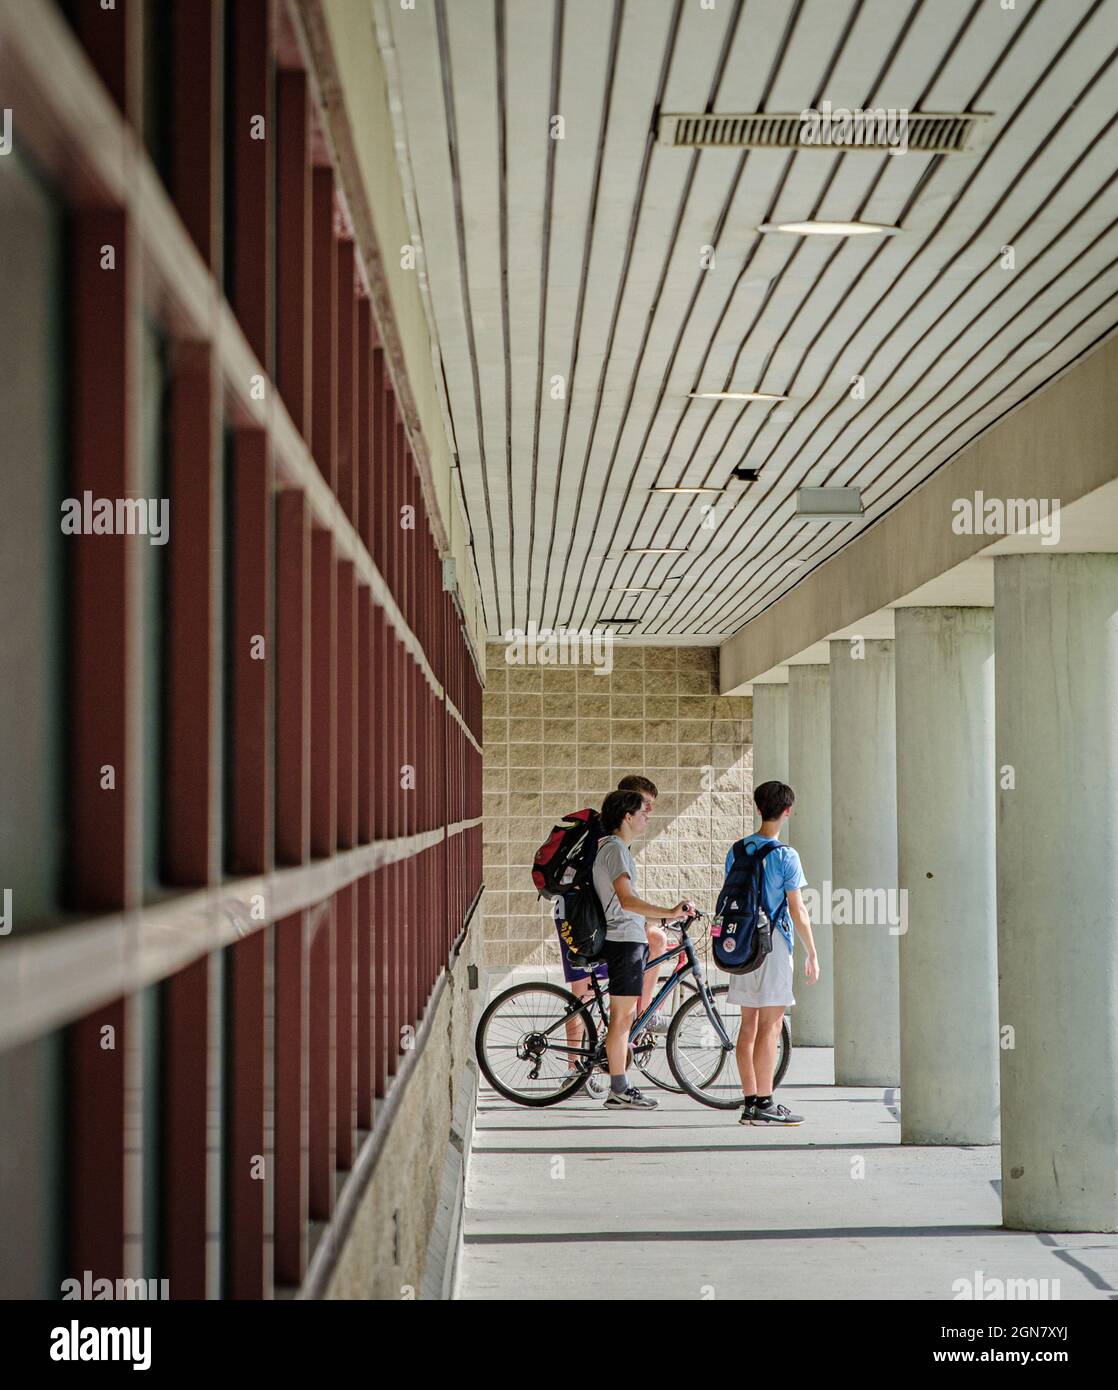 NEW ORLEANS, LA, USA - JULY 1, 2021:  Teenage boys with bikes chatting at lower level of parking garage Stock Photo